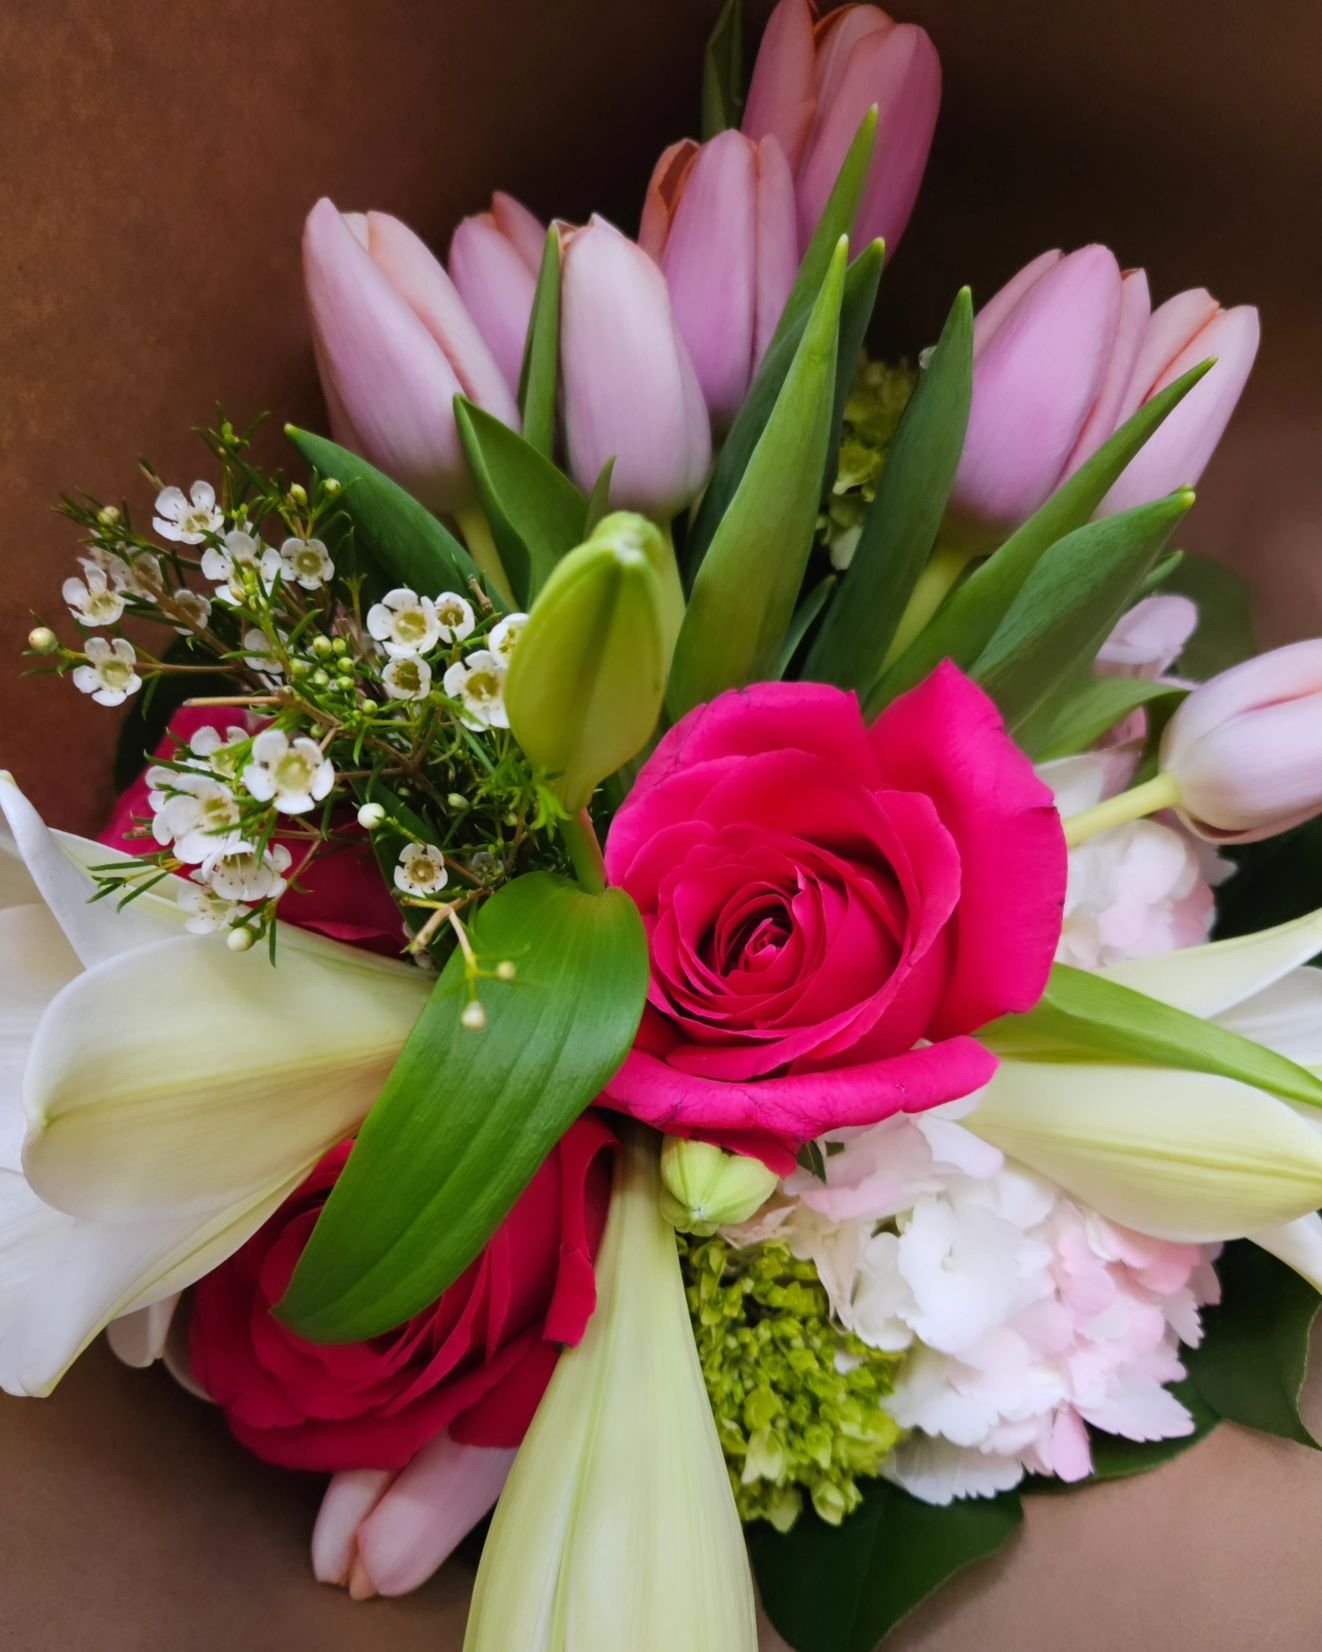 Lilies and tulips and roses, oh my!

Shop online every day or in person on Fridays